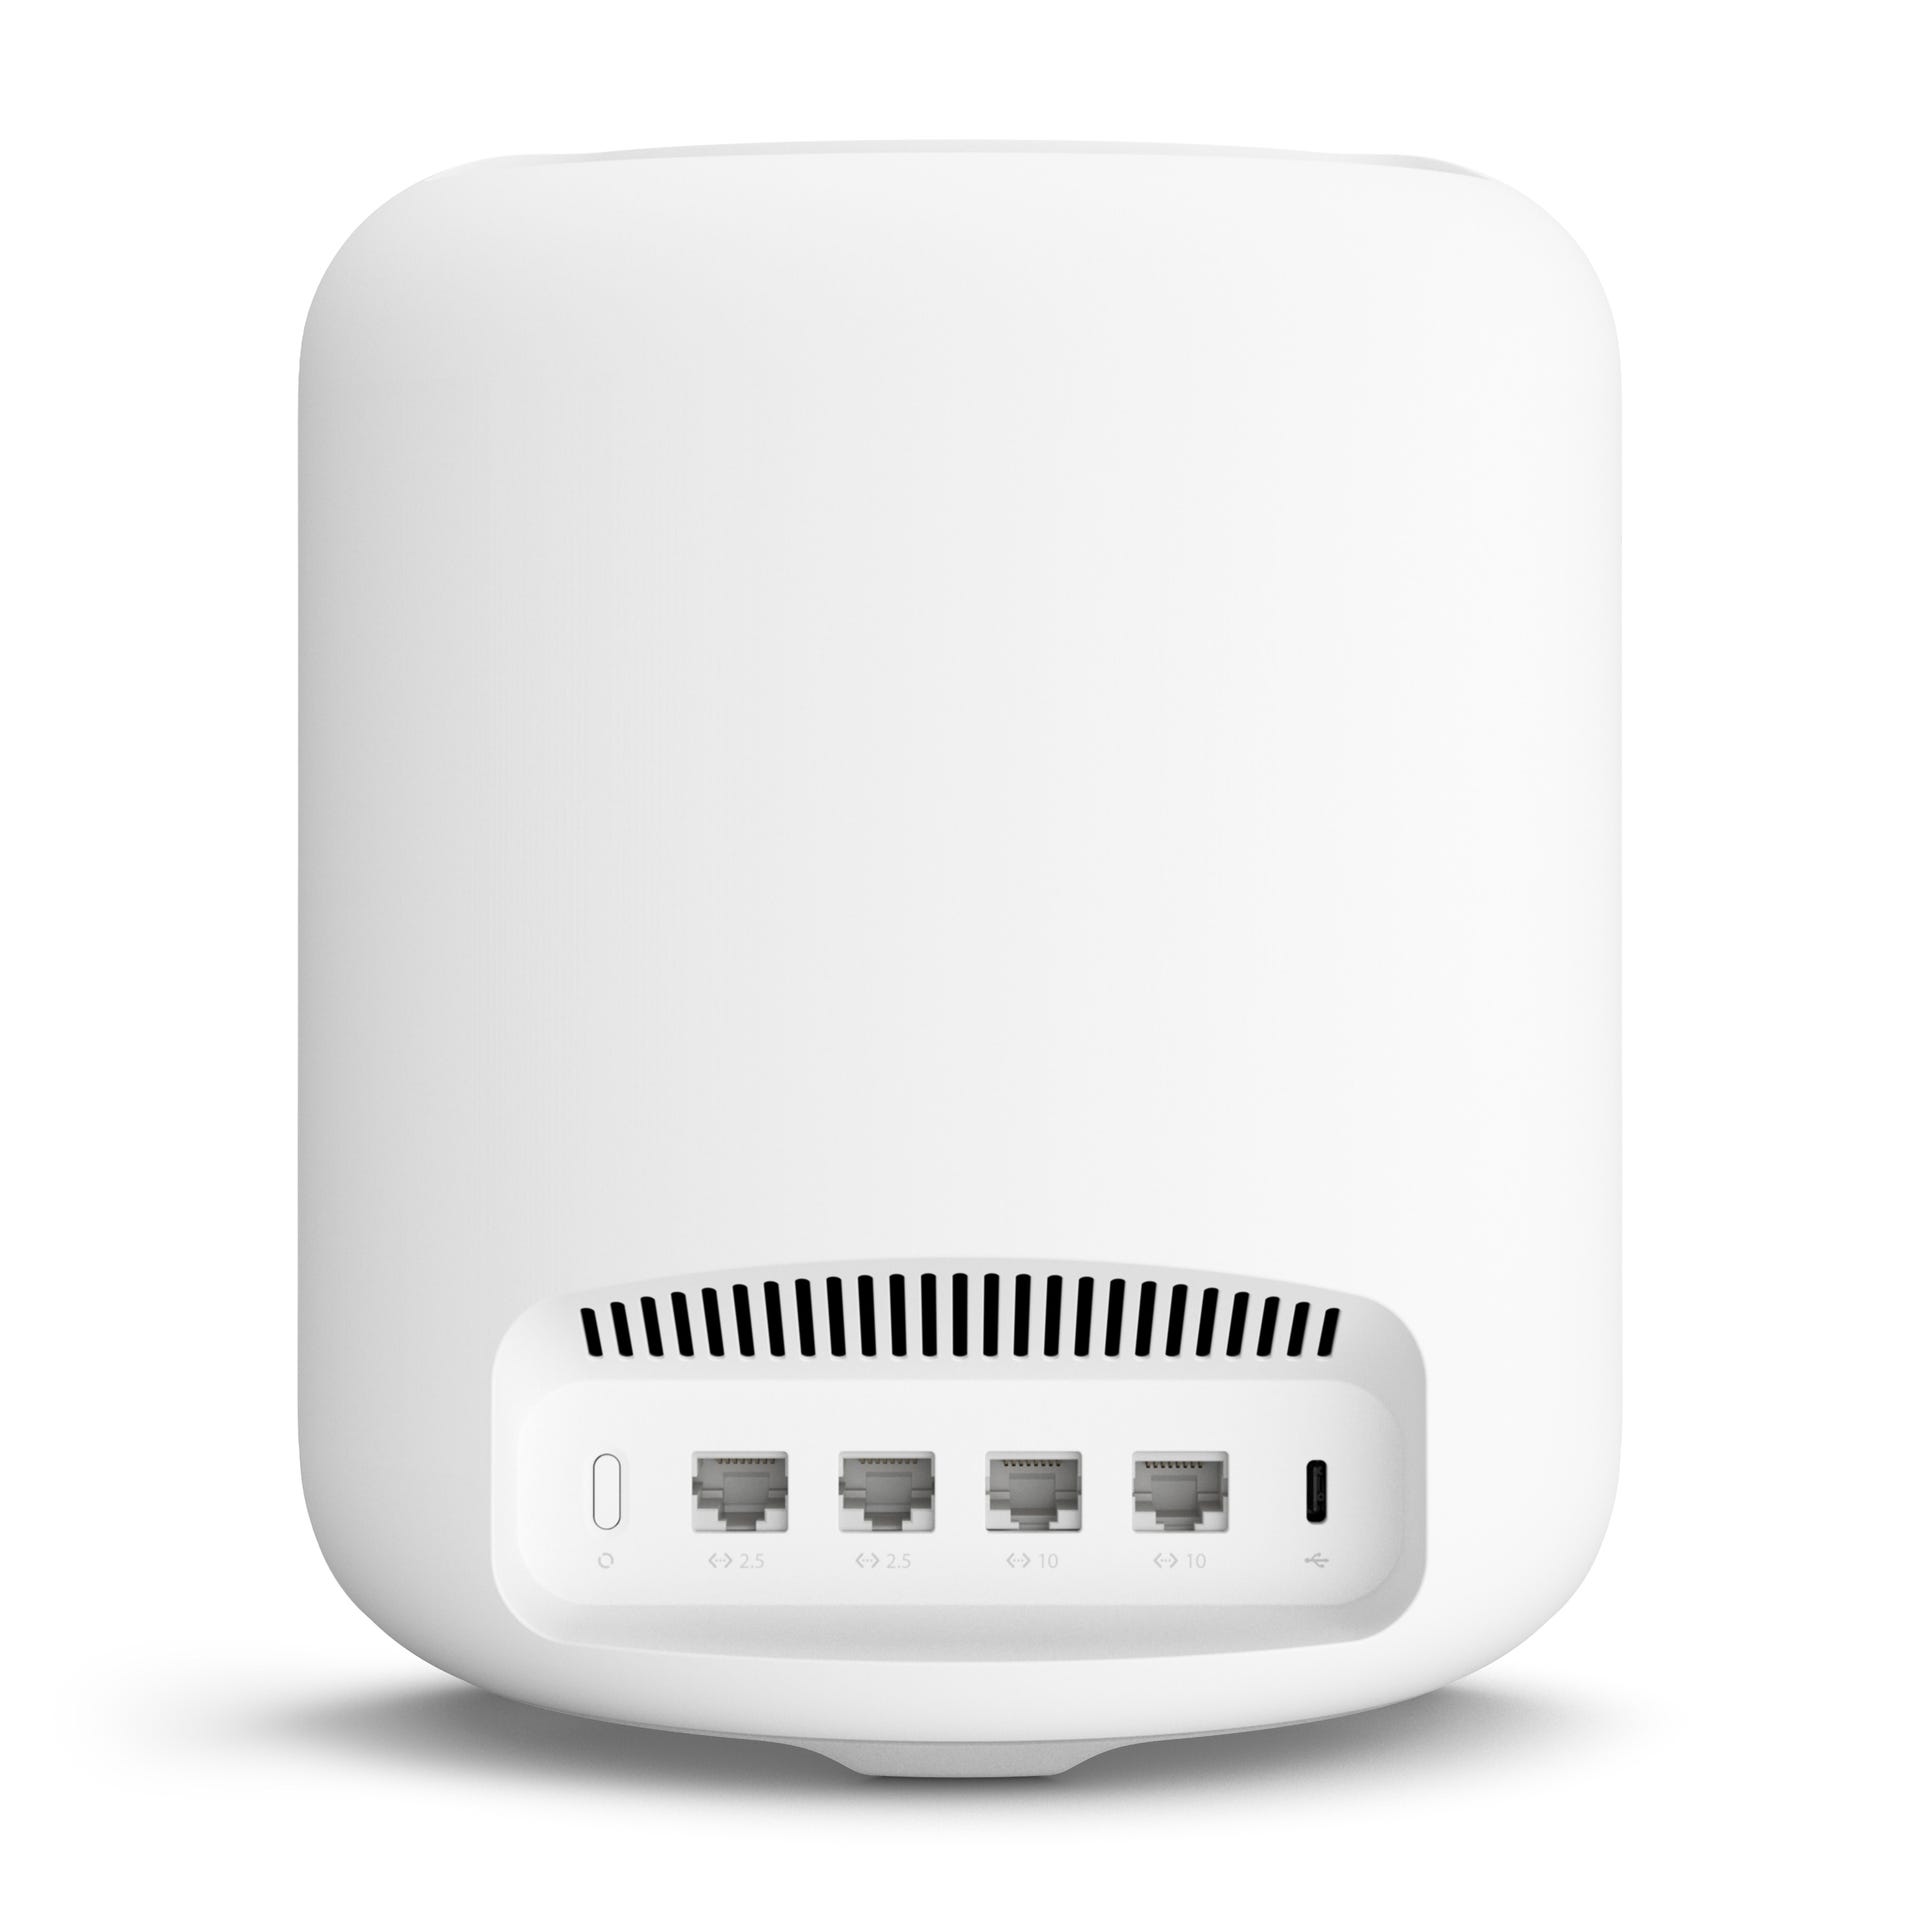 The back of the Eero Max 7 mesh router reveals four Ethernet ports, two of which support speeds as high as 10 gigabits per second.